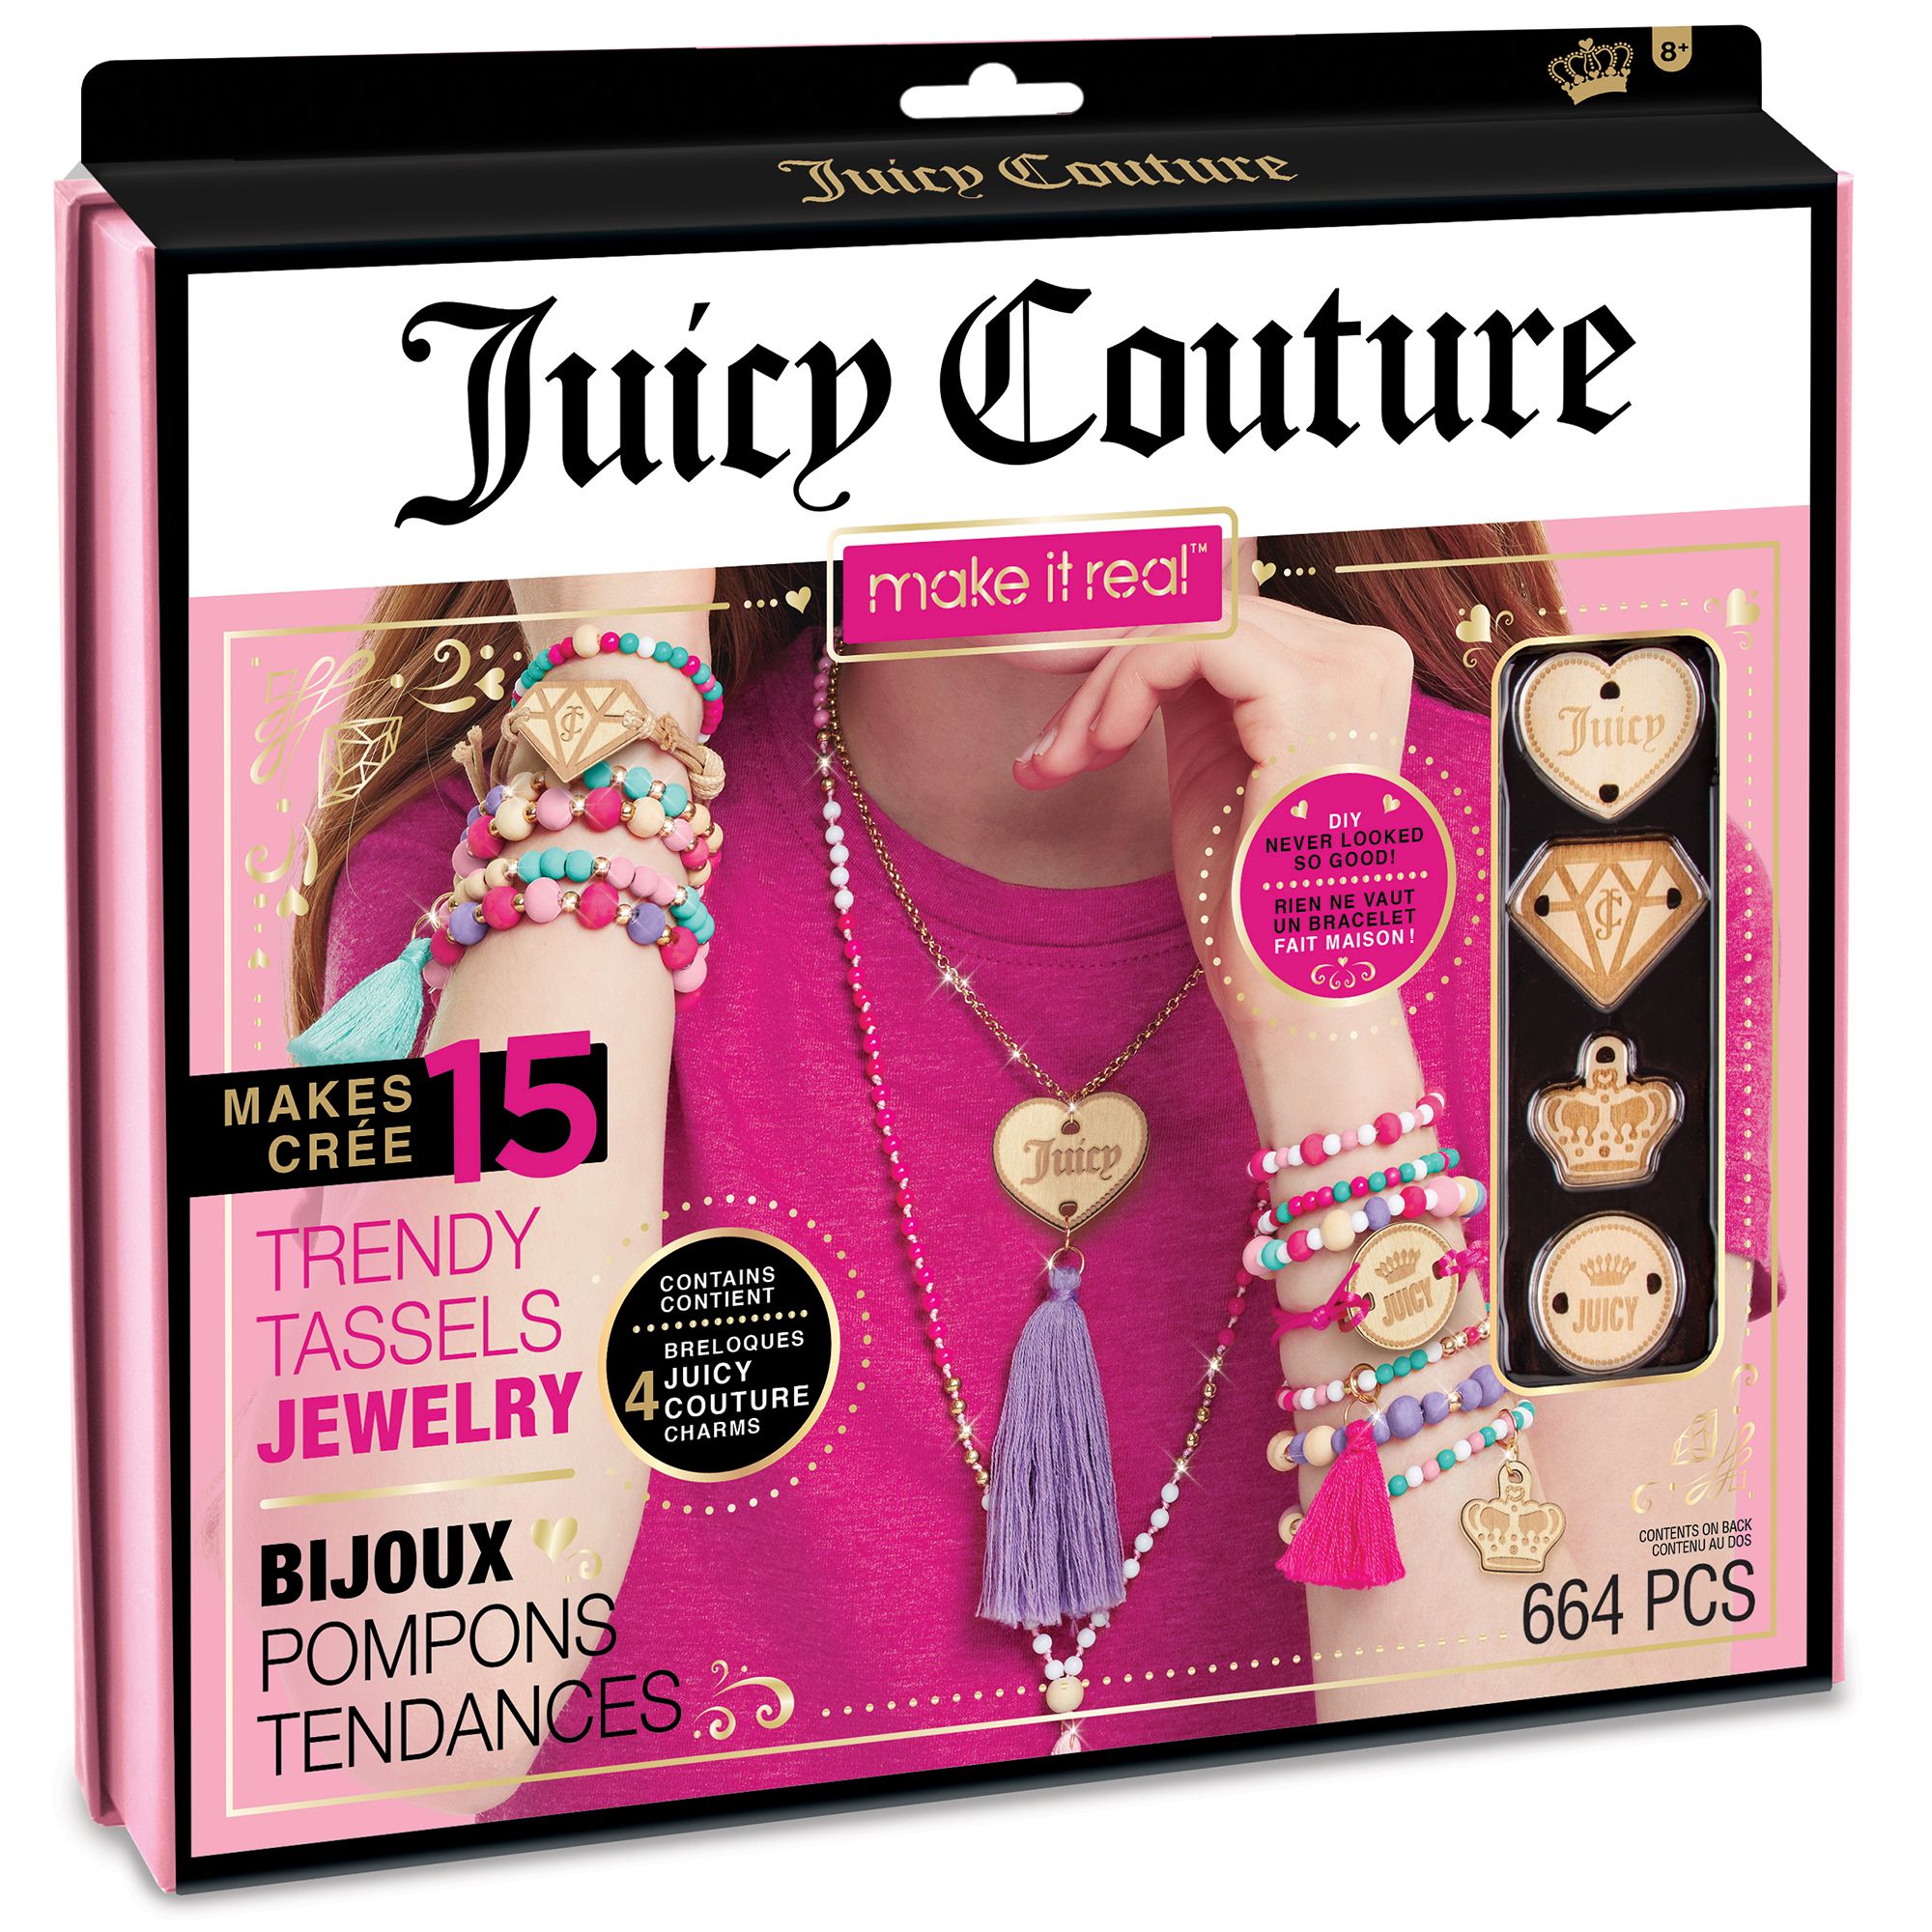 Juicy Couture Make It Real Chains & Charms Bracelet Kit Brand New Sealed  Box